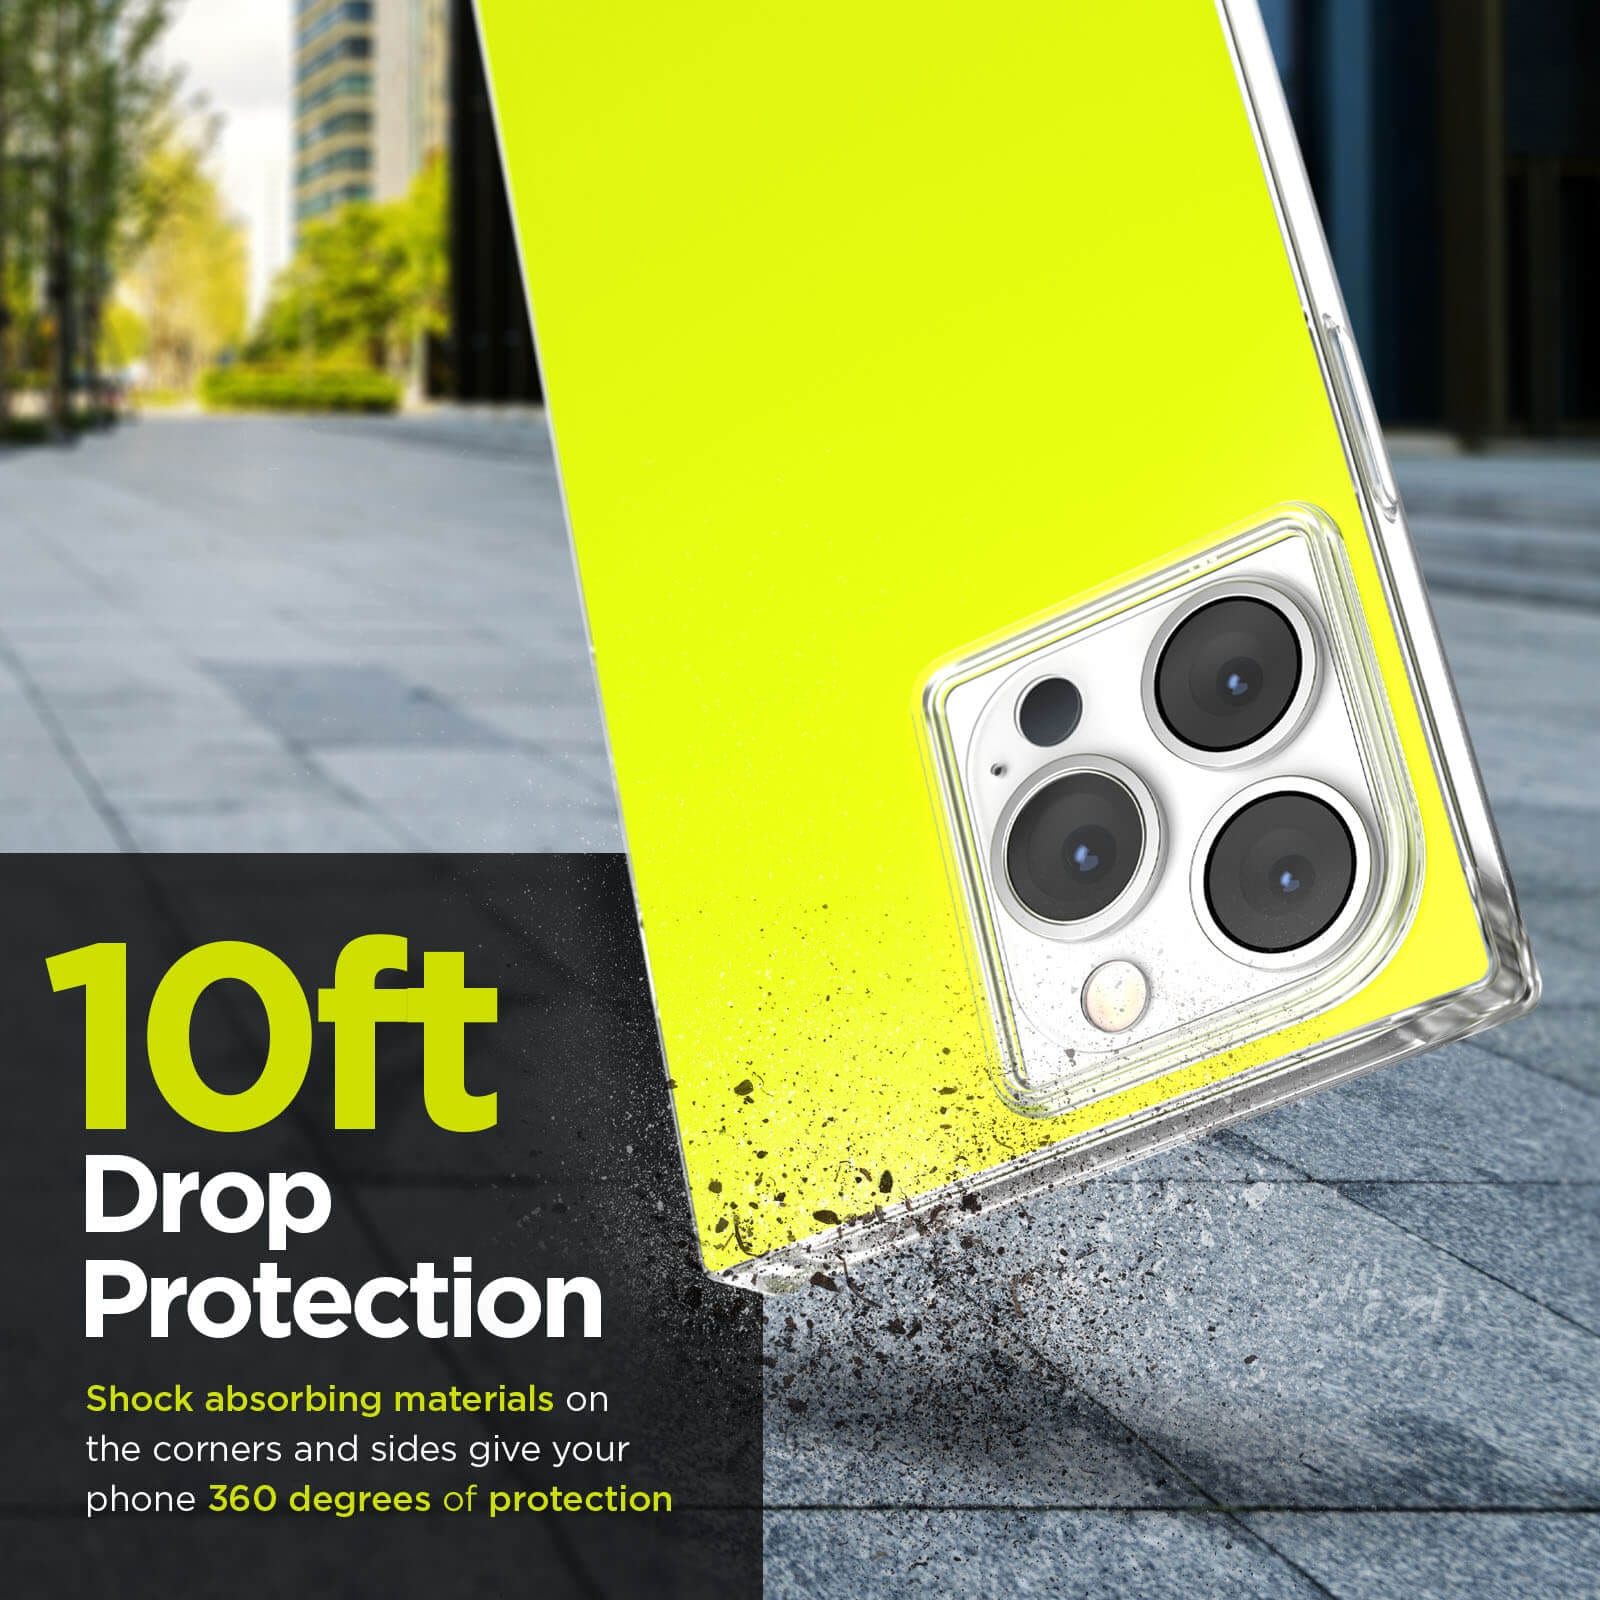 10ft drop protection. Shock absorbing materials on the corners and sides give your phone 360 degrees of protection. color::Neon Yellow